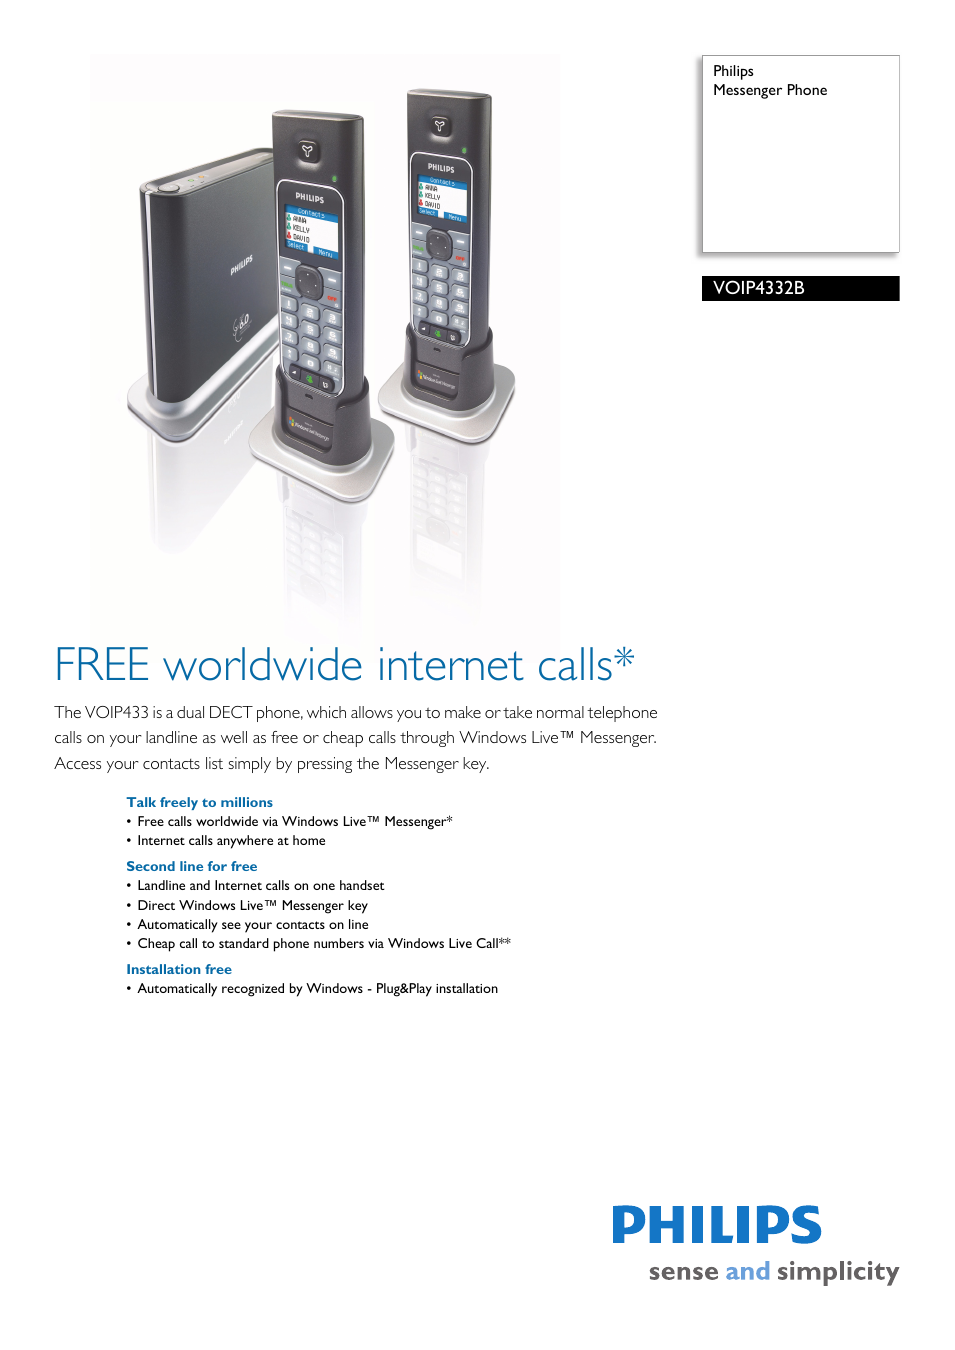 VOIP4332B